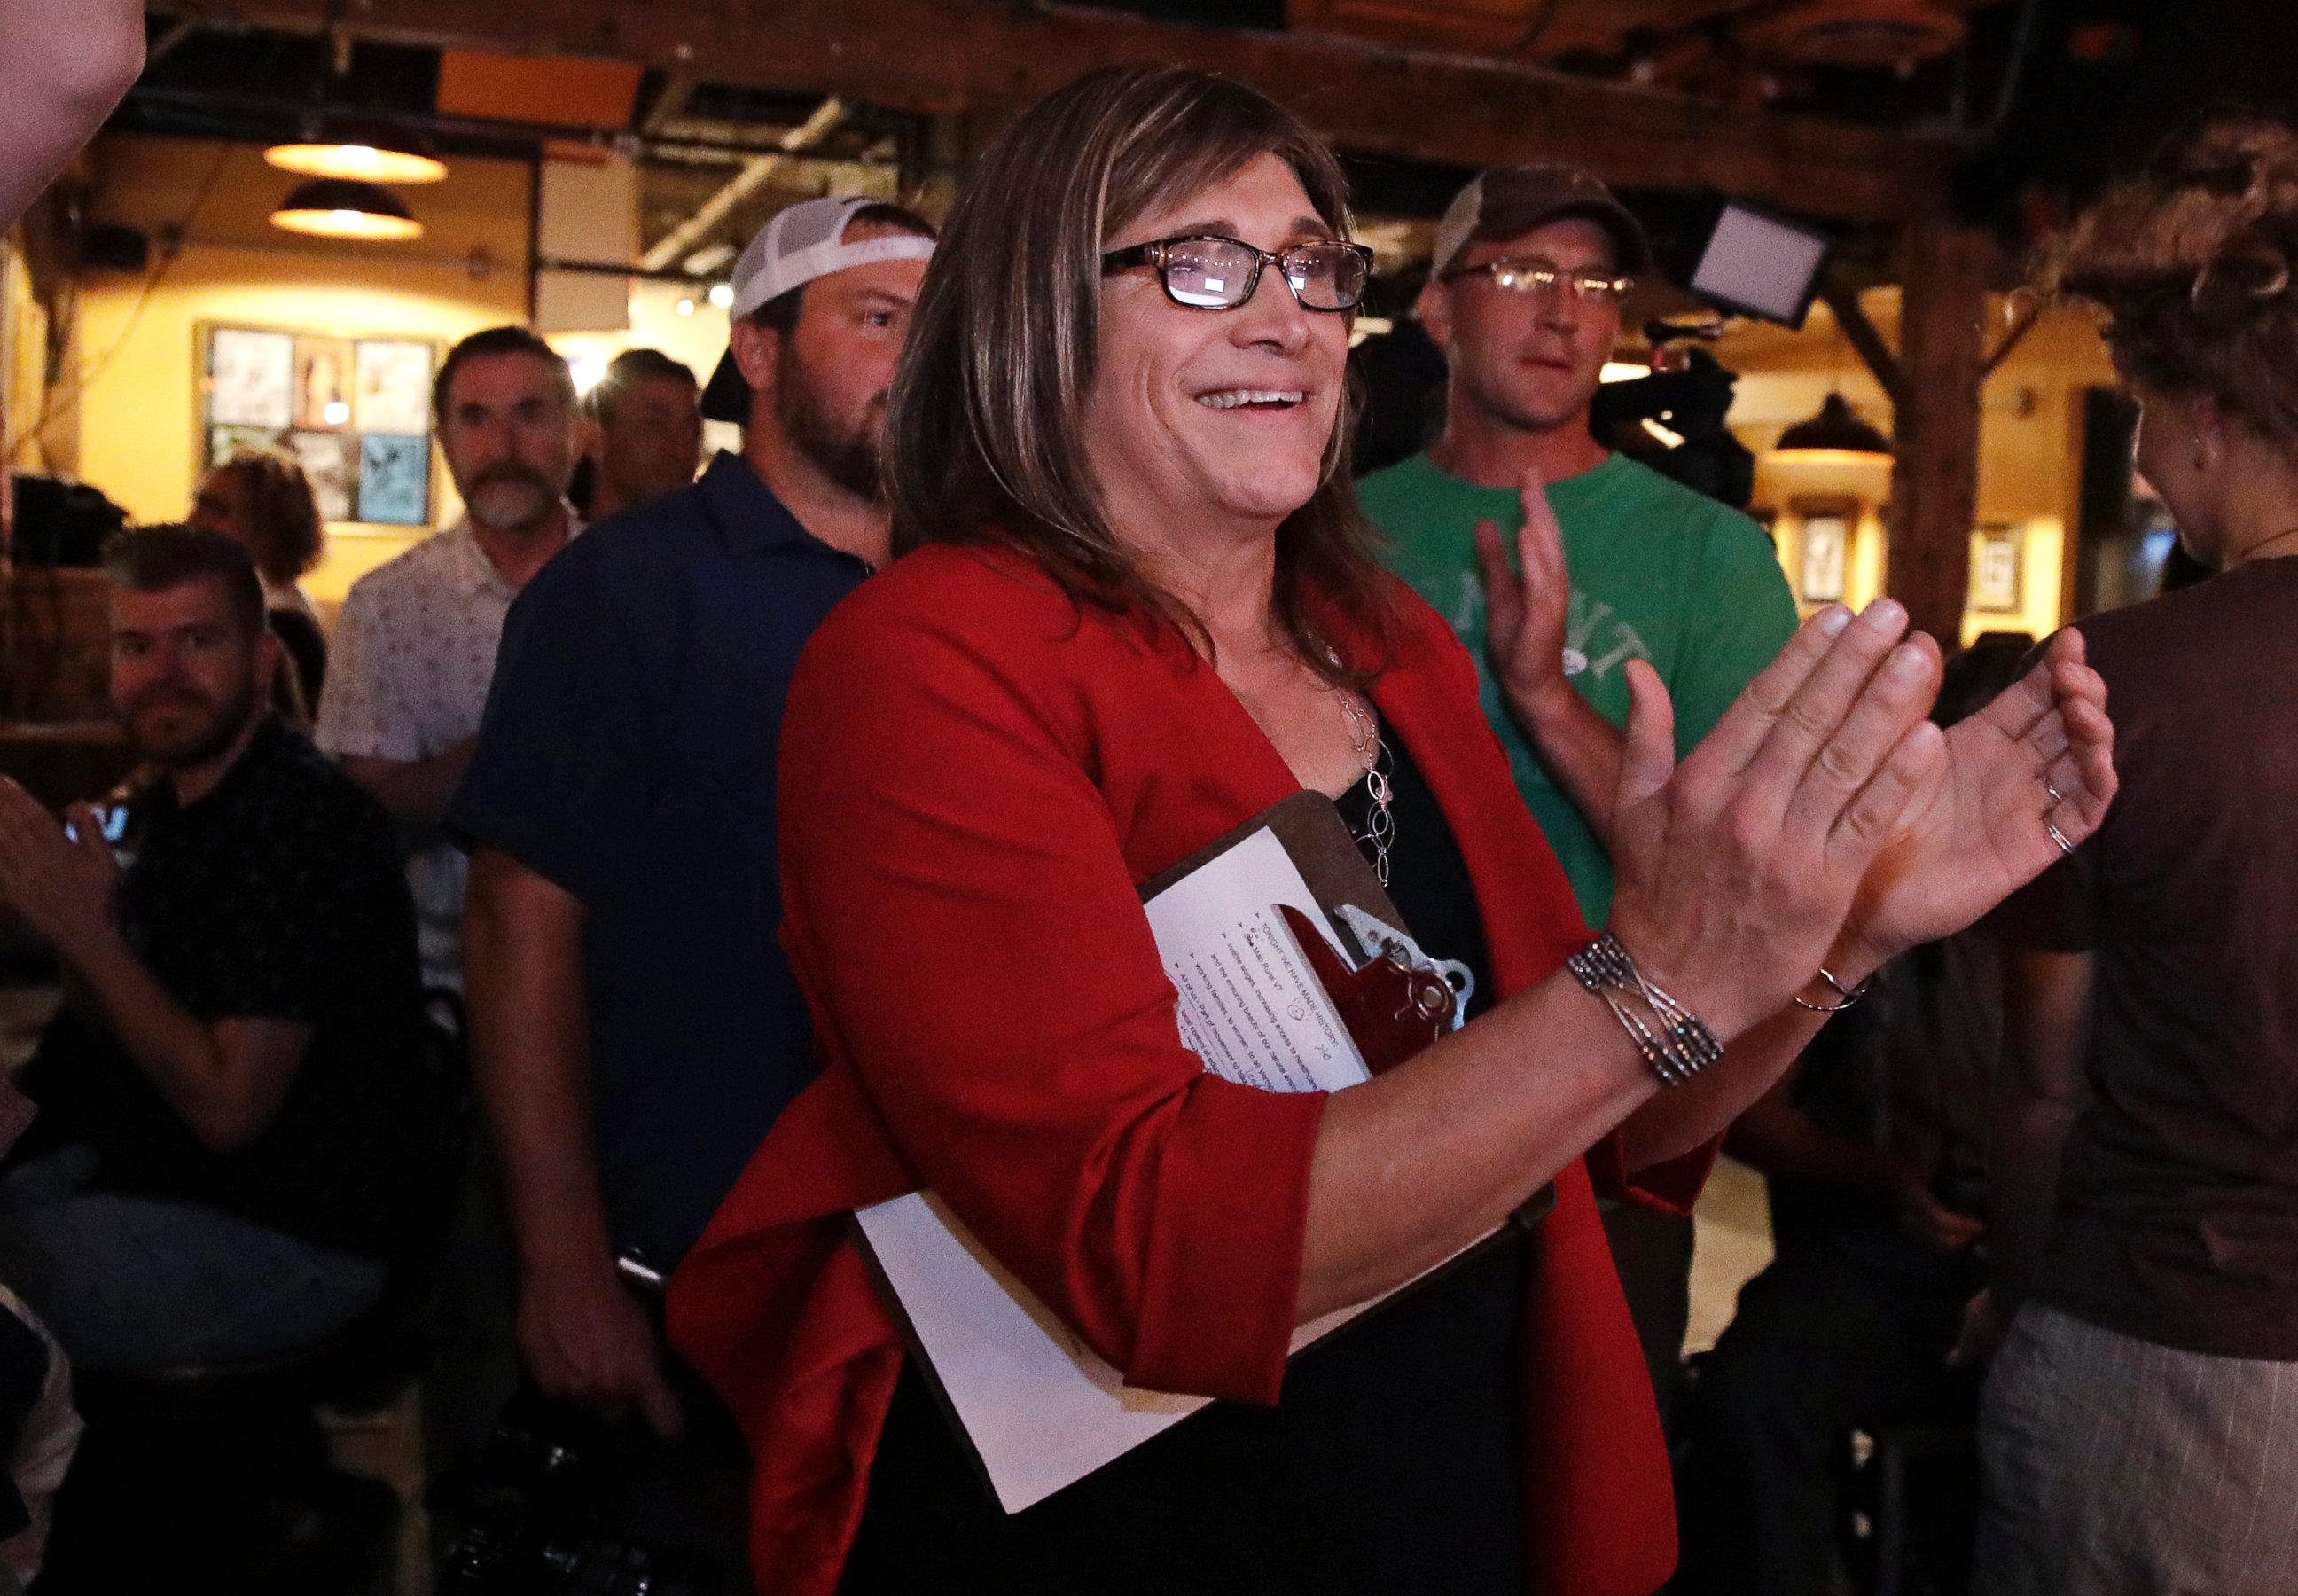 Vermont Democratic gubernatorial candidate Christine Hallquist, center, a transgender woman and former electric company executive, embraces supporters after claiming victory during her election night party in Burlington, Vt., Tuesday, Aug. 14, 2018. 